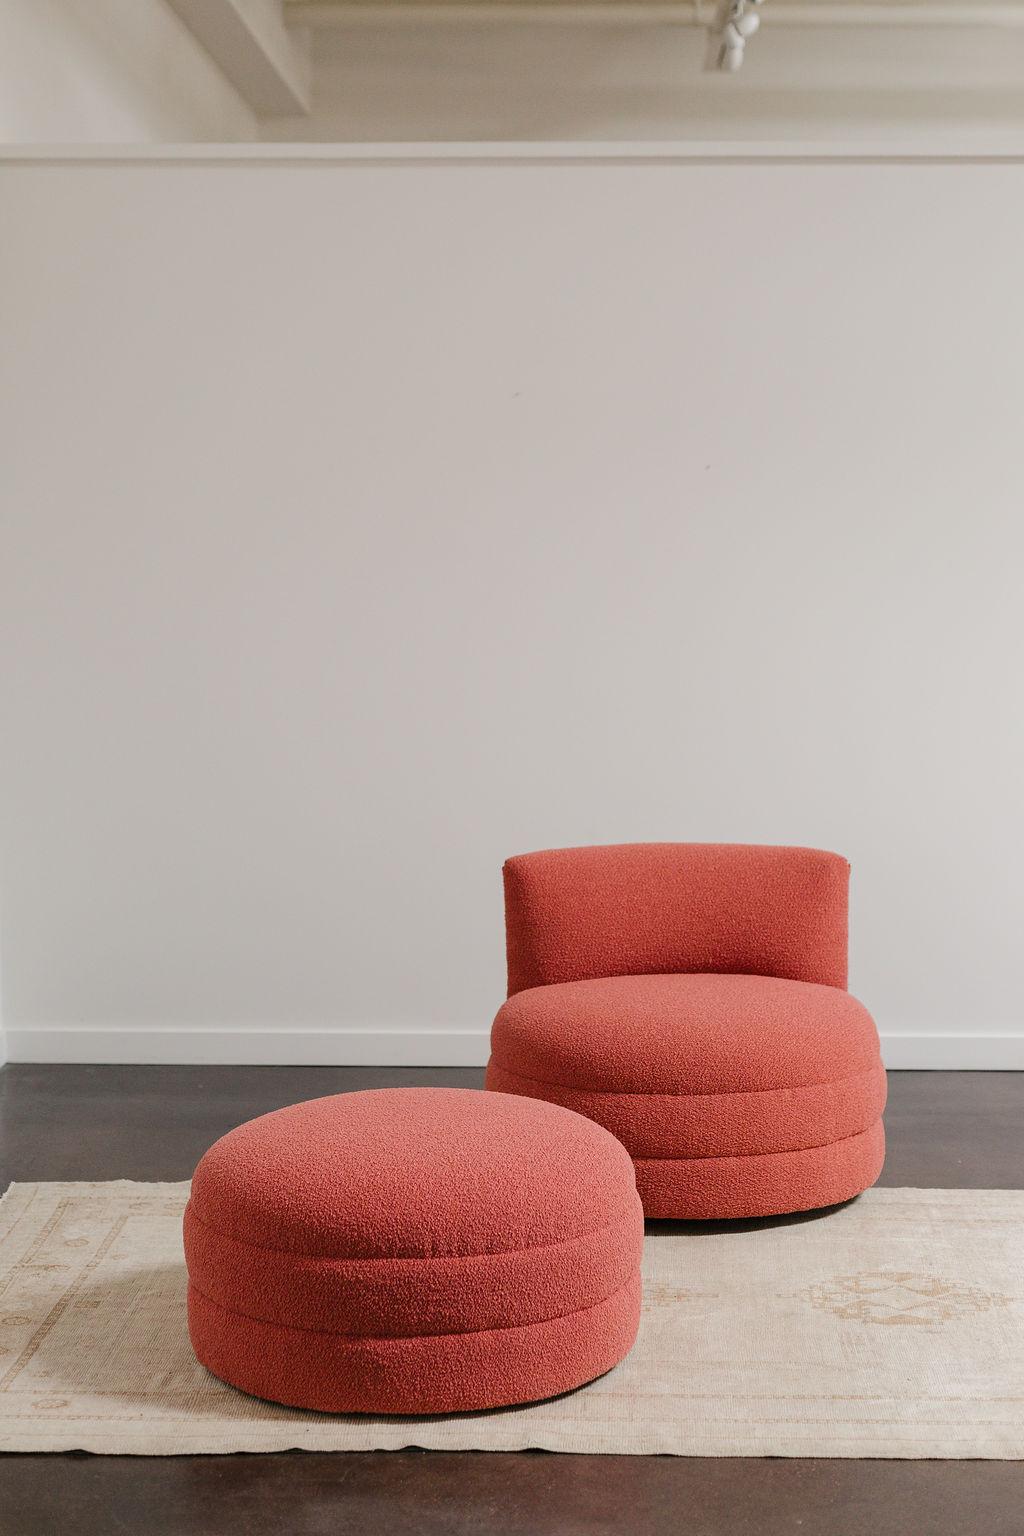 A stylish Vladimir Kagan-inspired Weiman barrel lounge swivel chair and ottoman from the 1980s, refinished by the Selby House in a resilient Yarn Collective boucle upholstery, enhancing its chic and refined appearance.